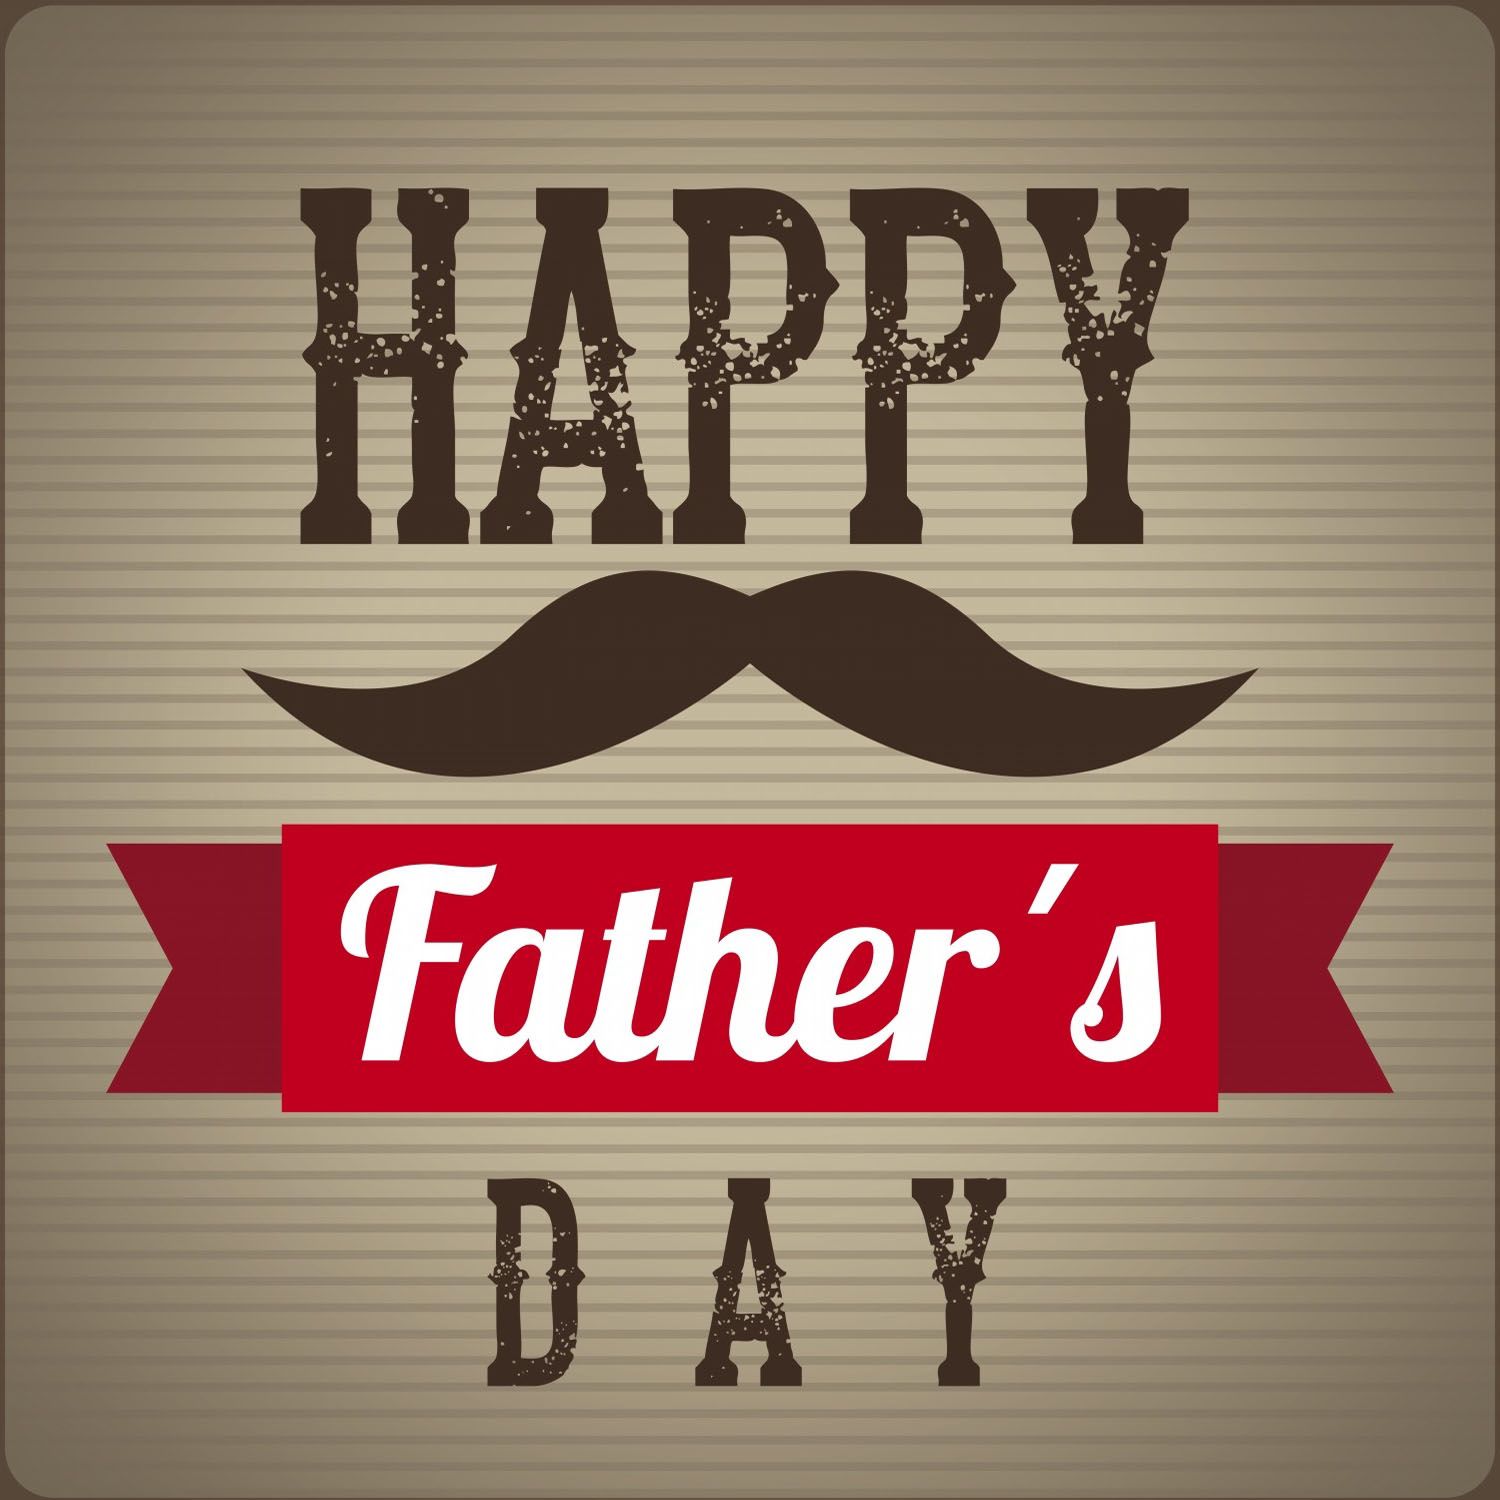 Happy Father's Day 2022 Image, Quotes, Wishes, Greetings, Cards and Whatsapp Status